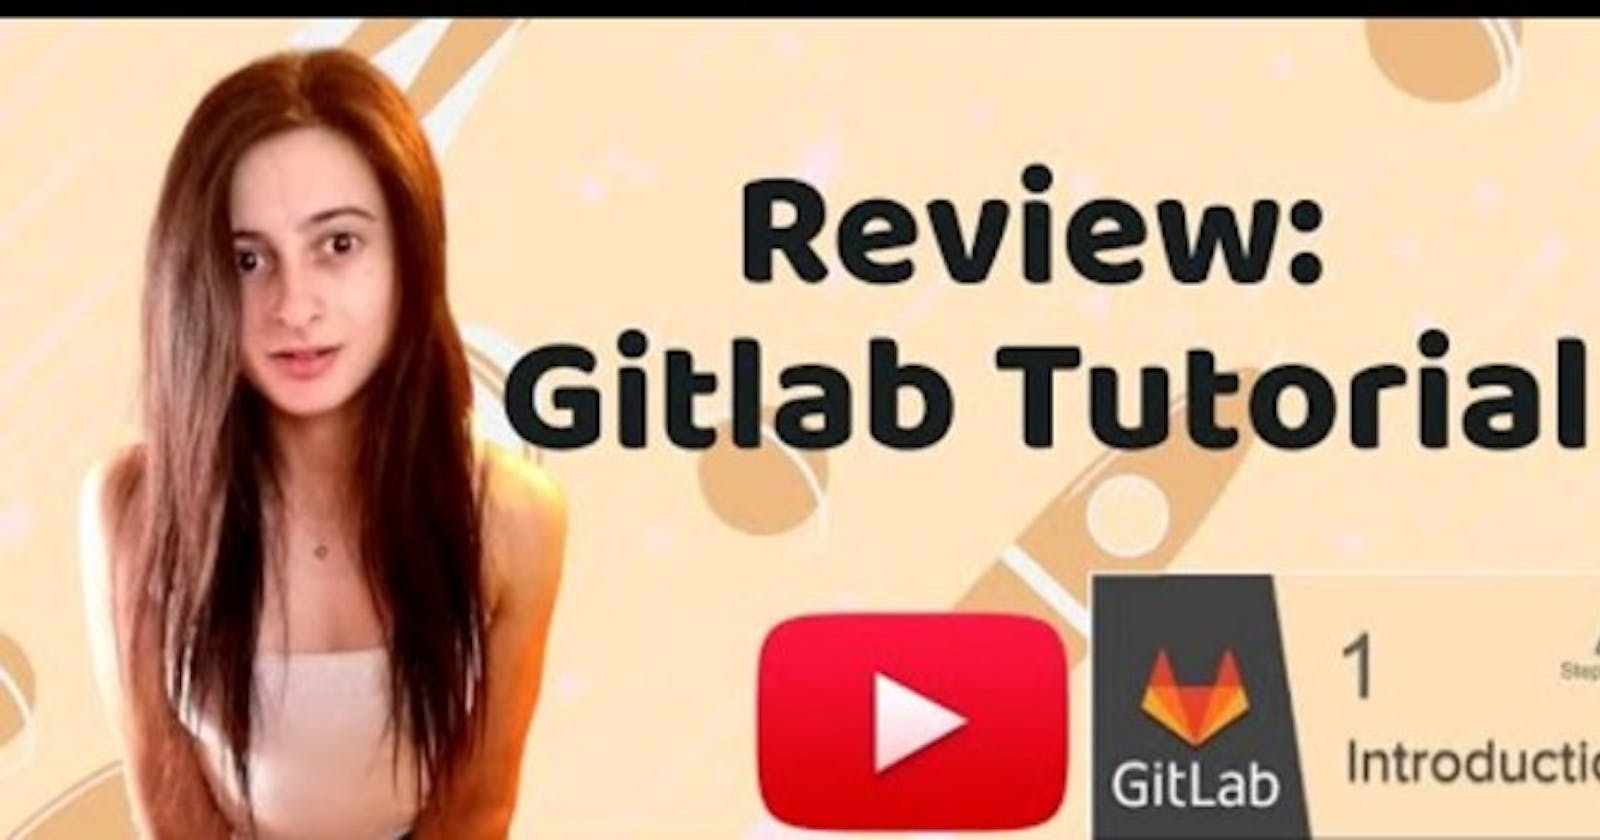 Review: GitLab Beginner Tutorial by Automation Step by Step